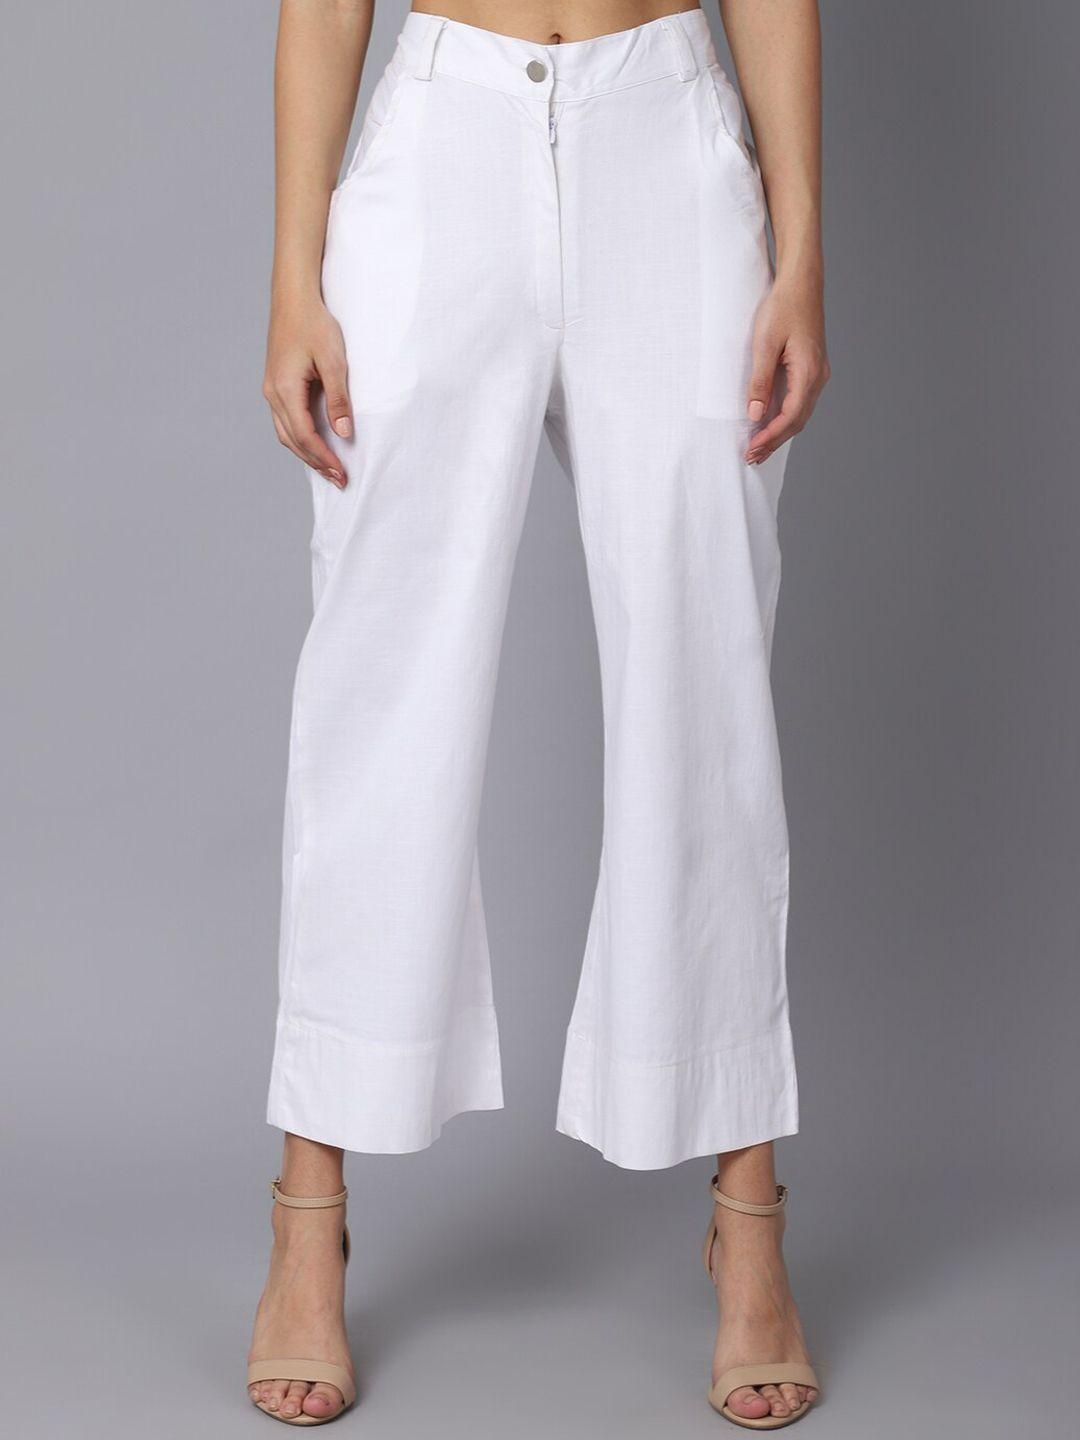 tag 7 women white smart flared trousers